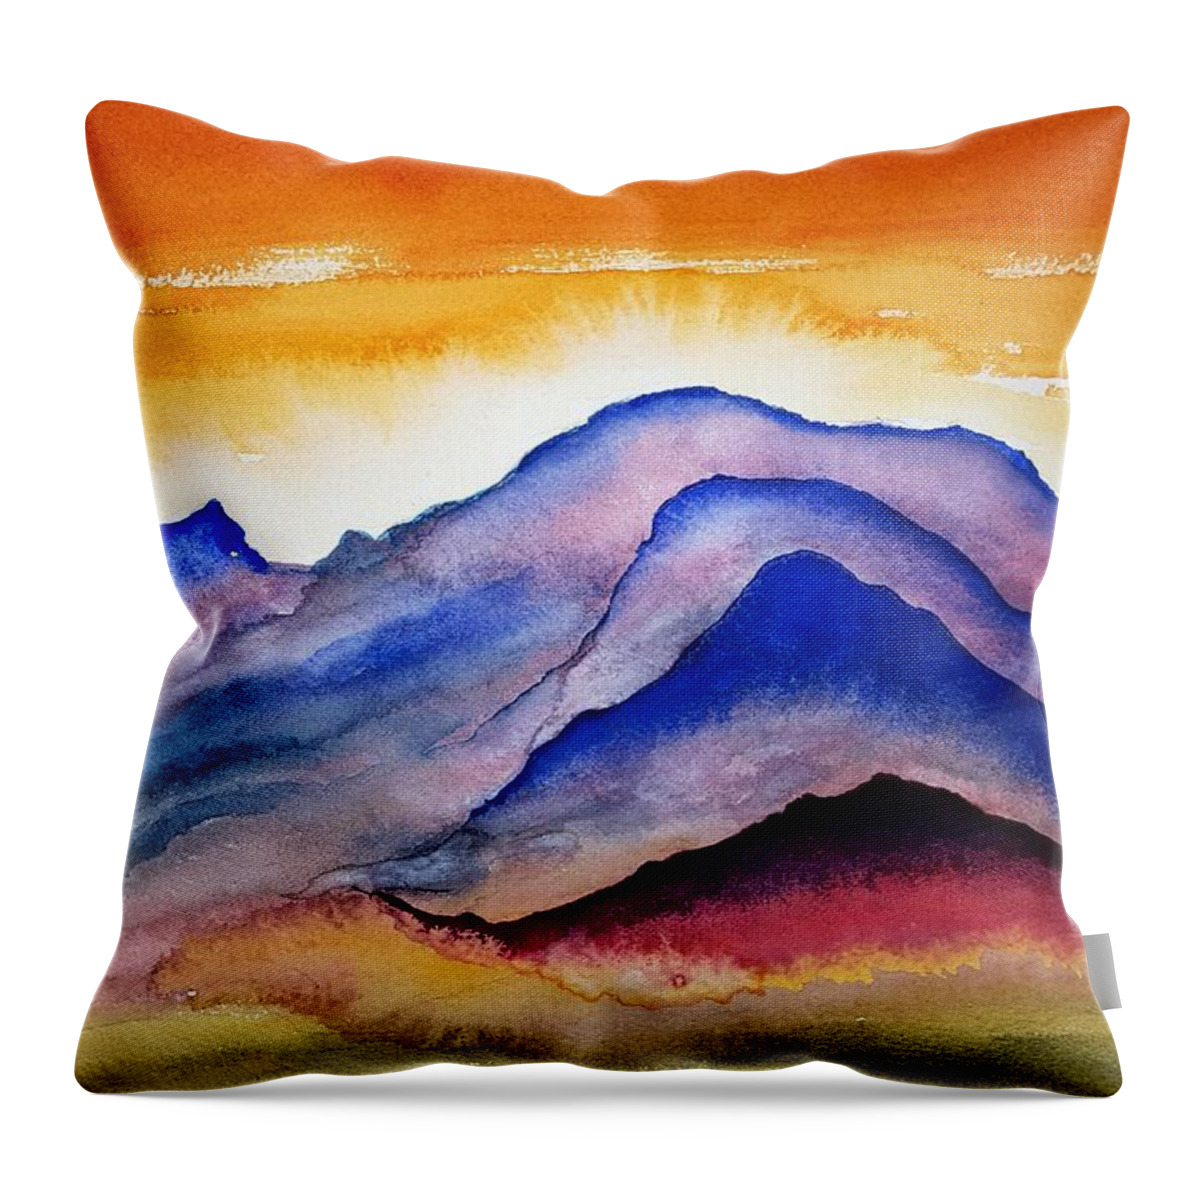 Watercolor Throw Pillow featuring the painting Planet Four Lore by John Klobucher